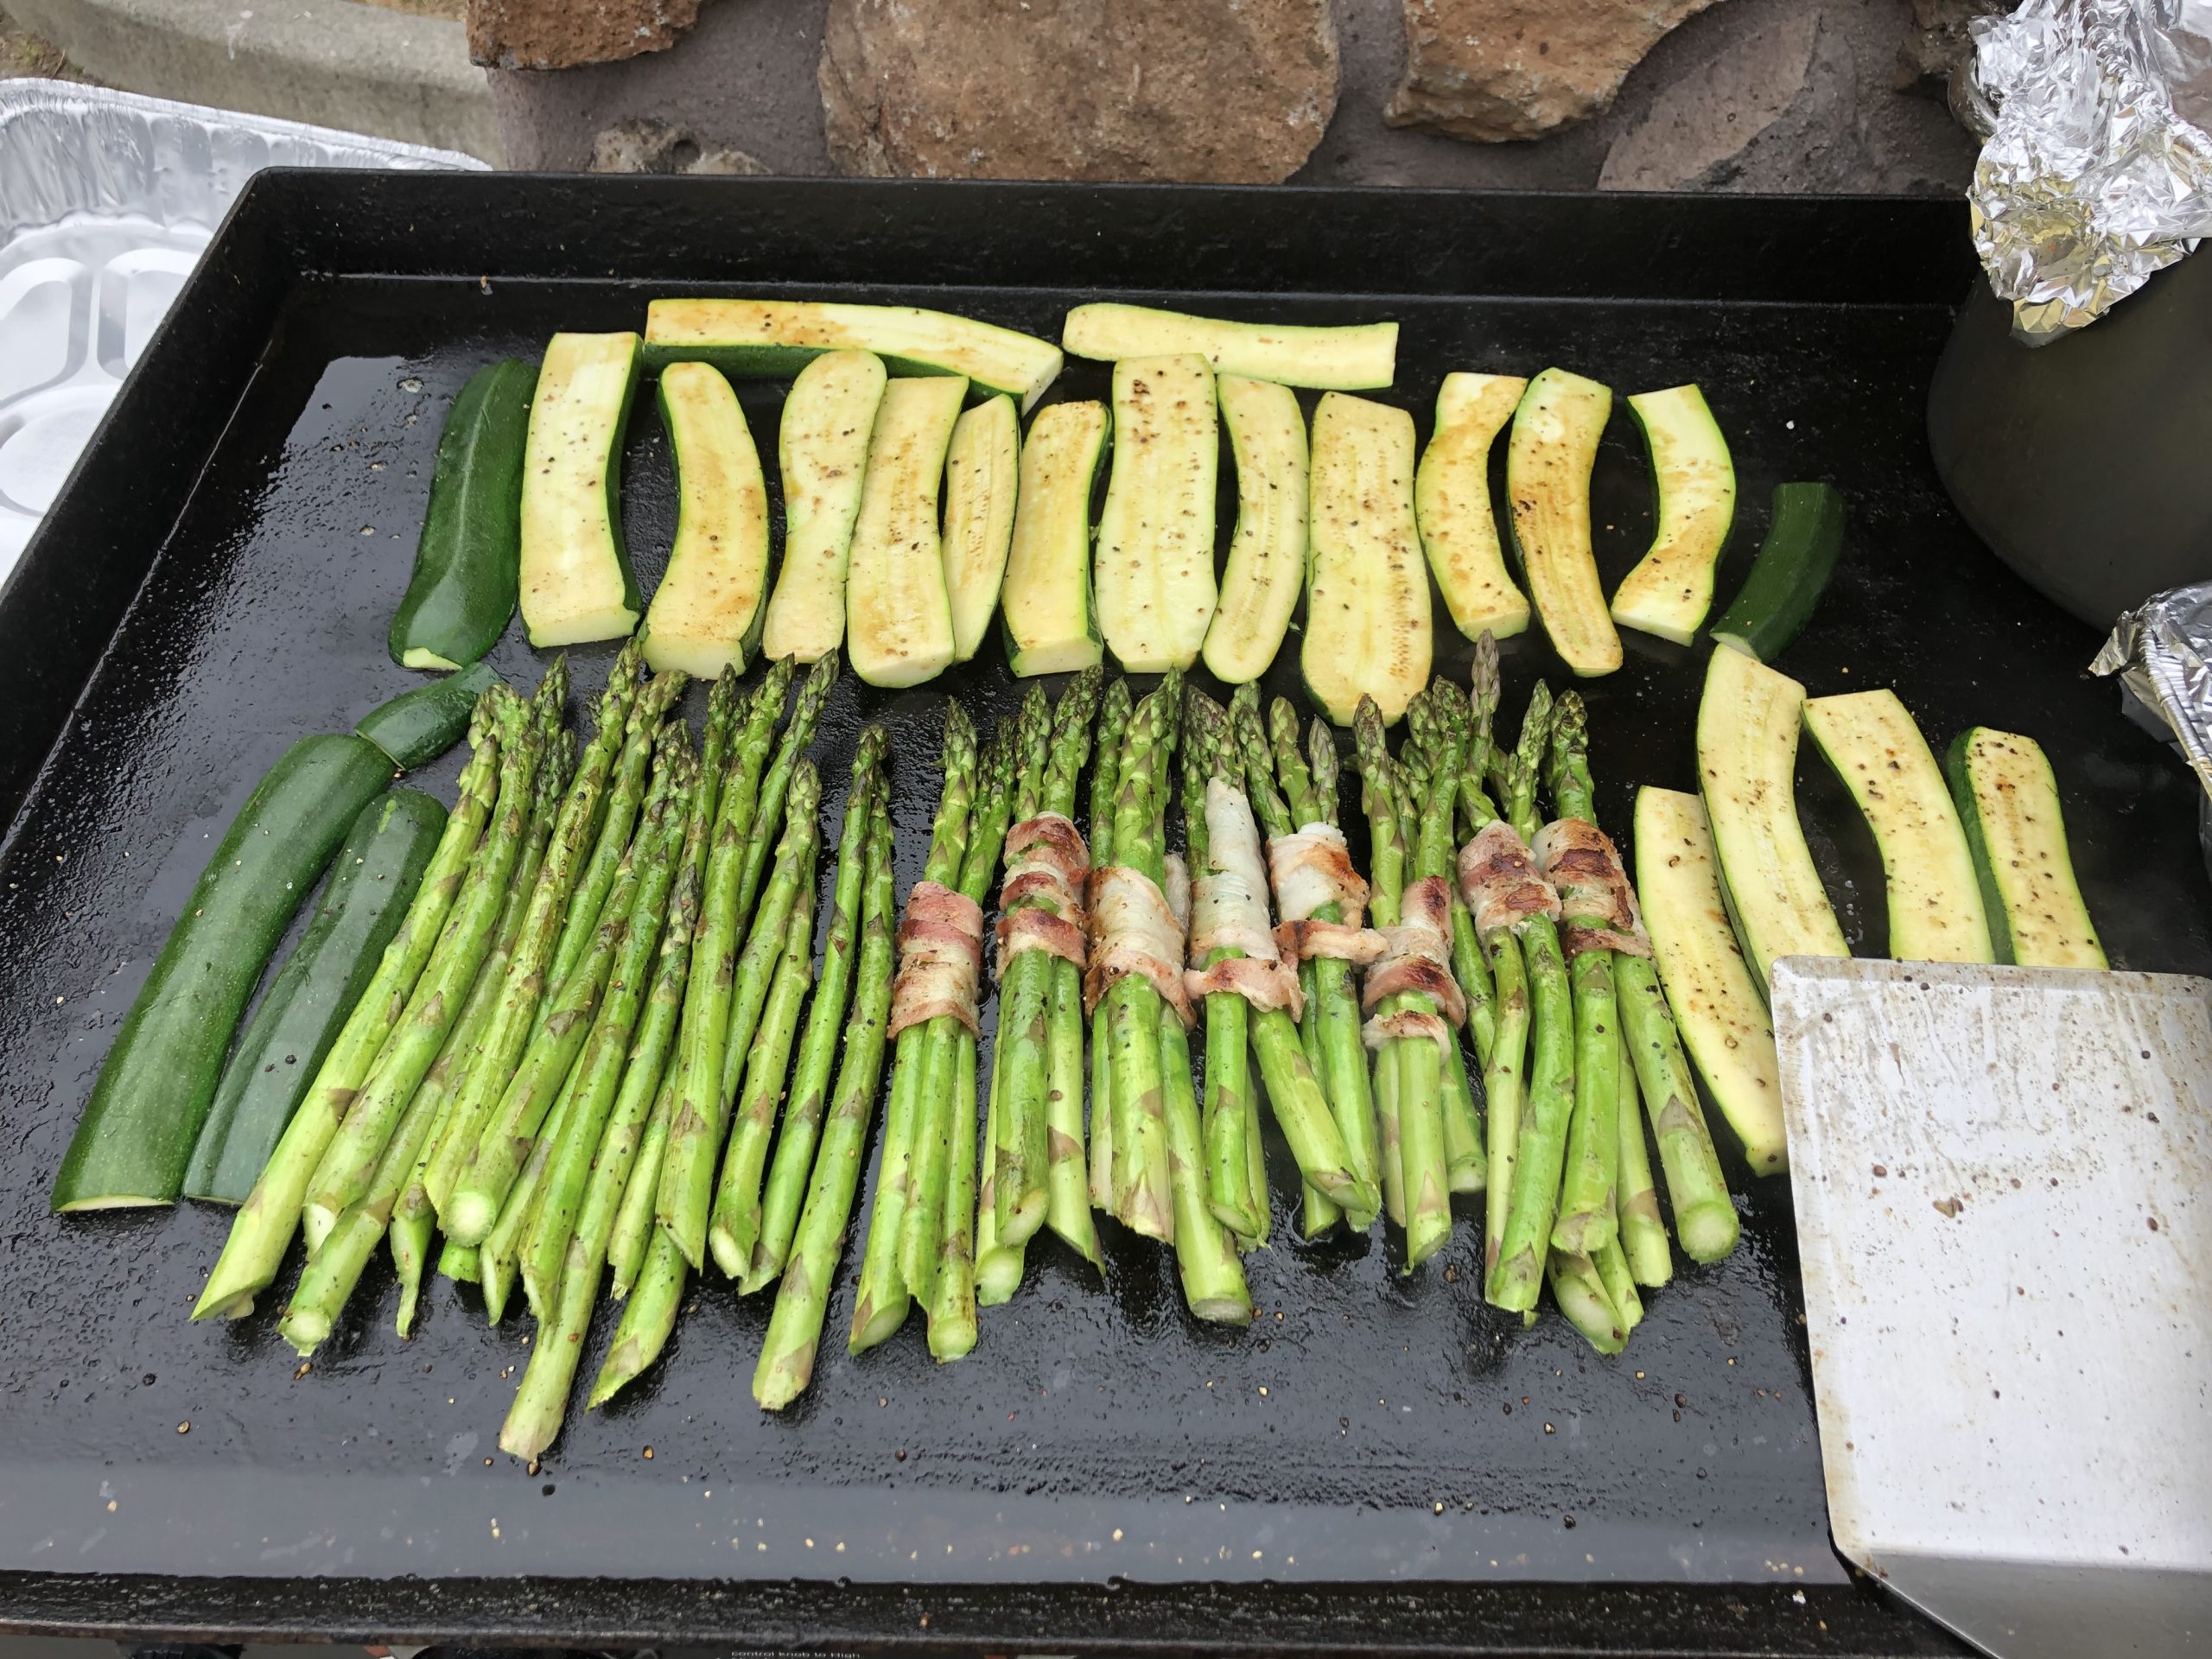 A grill with asparagus and zucchini on it.